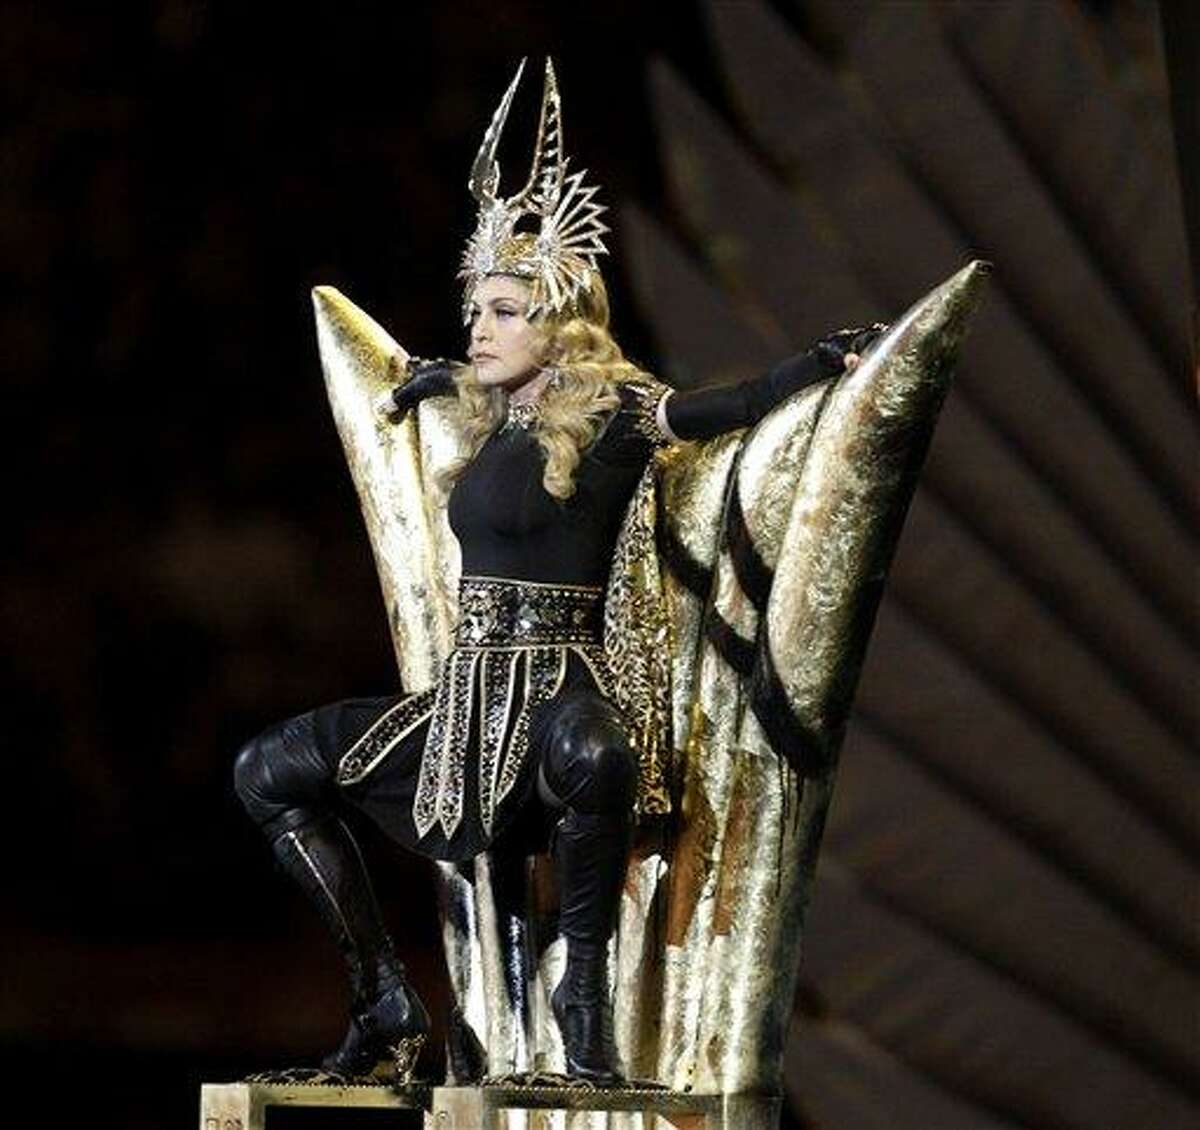 Madonna performs during halftime of the NFL Super Bowl XLVI football game between the New York Giants and the New England Patriots, Sunday, Feb. 5, 2012, in Indianapolis. (AP Photo/Matt Slocum)